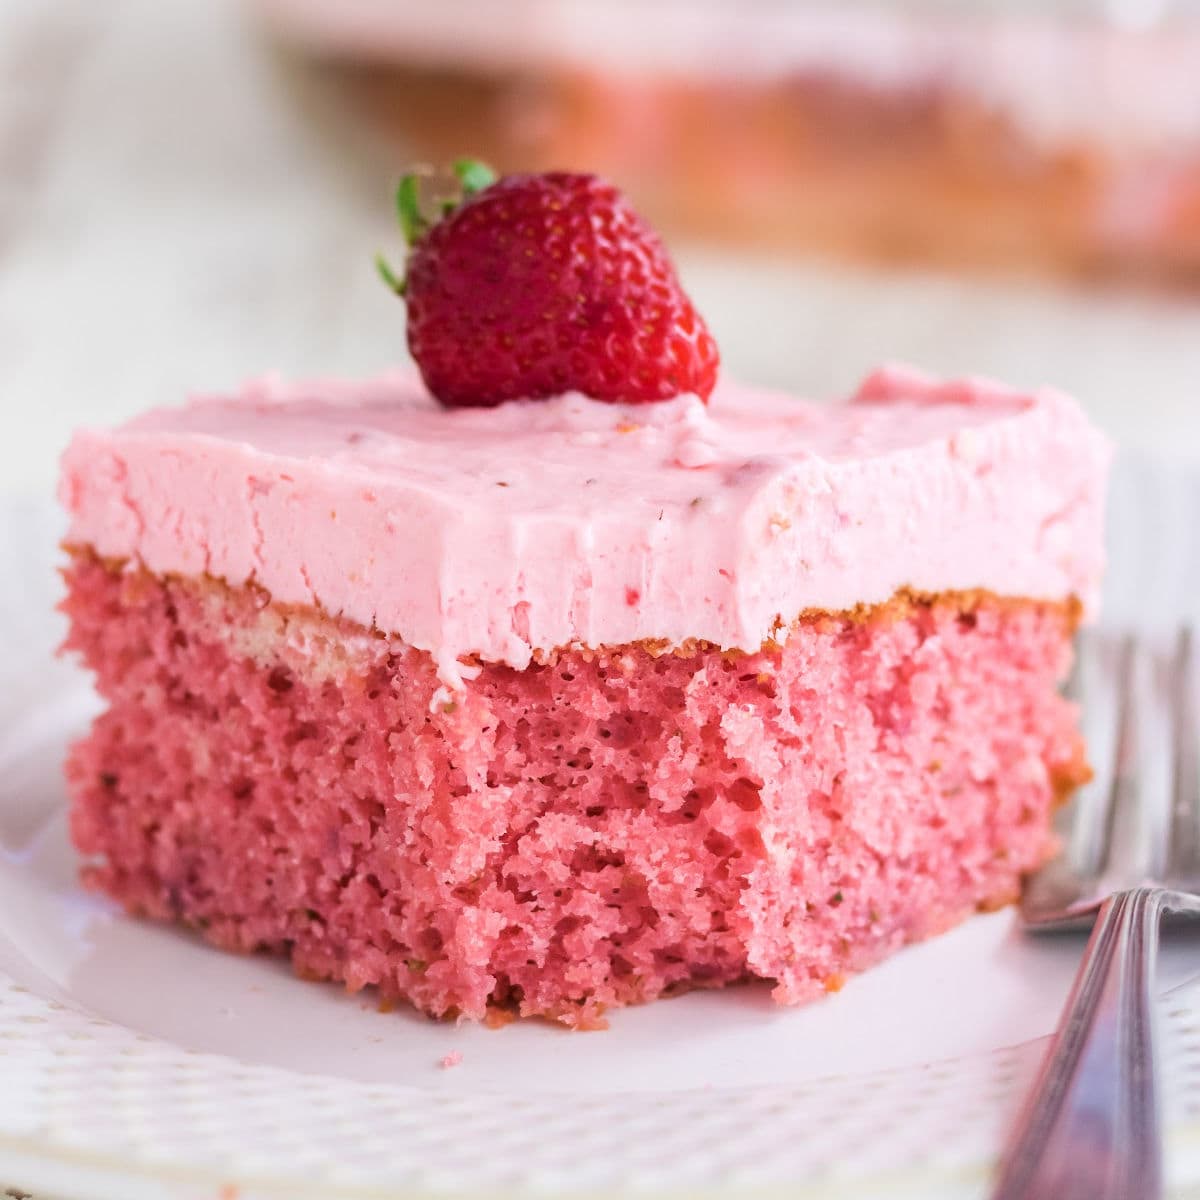 Closeup of a square of strawberry cake with a berry on top.